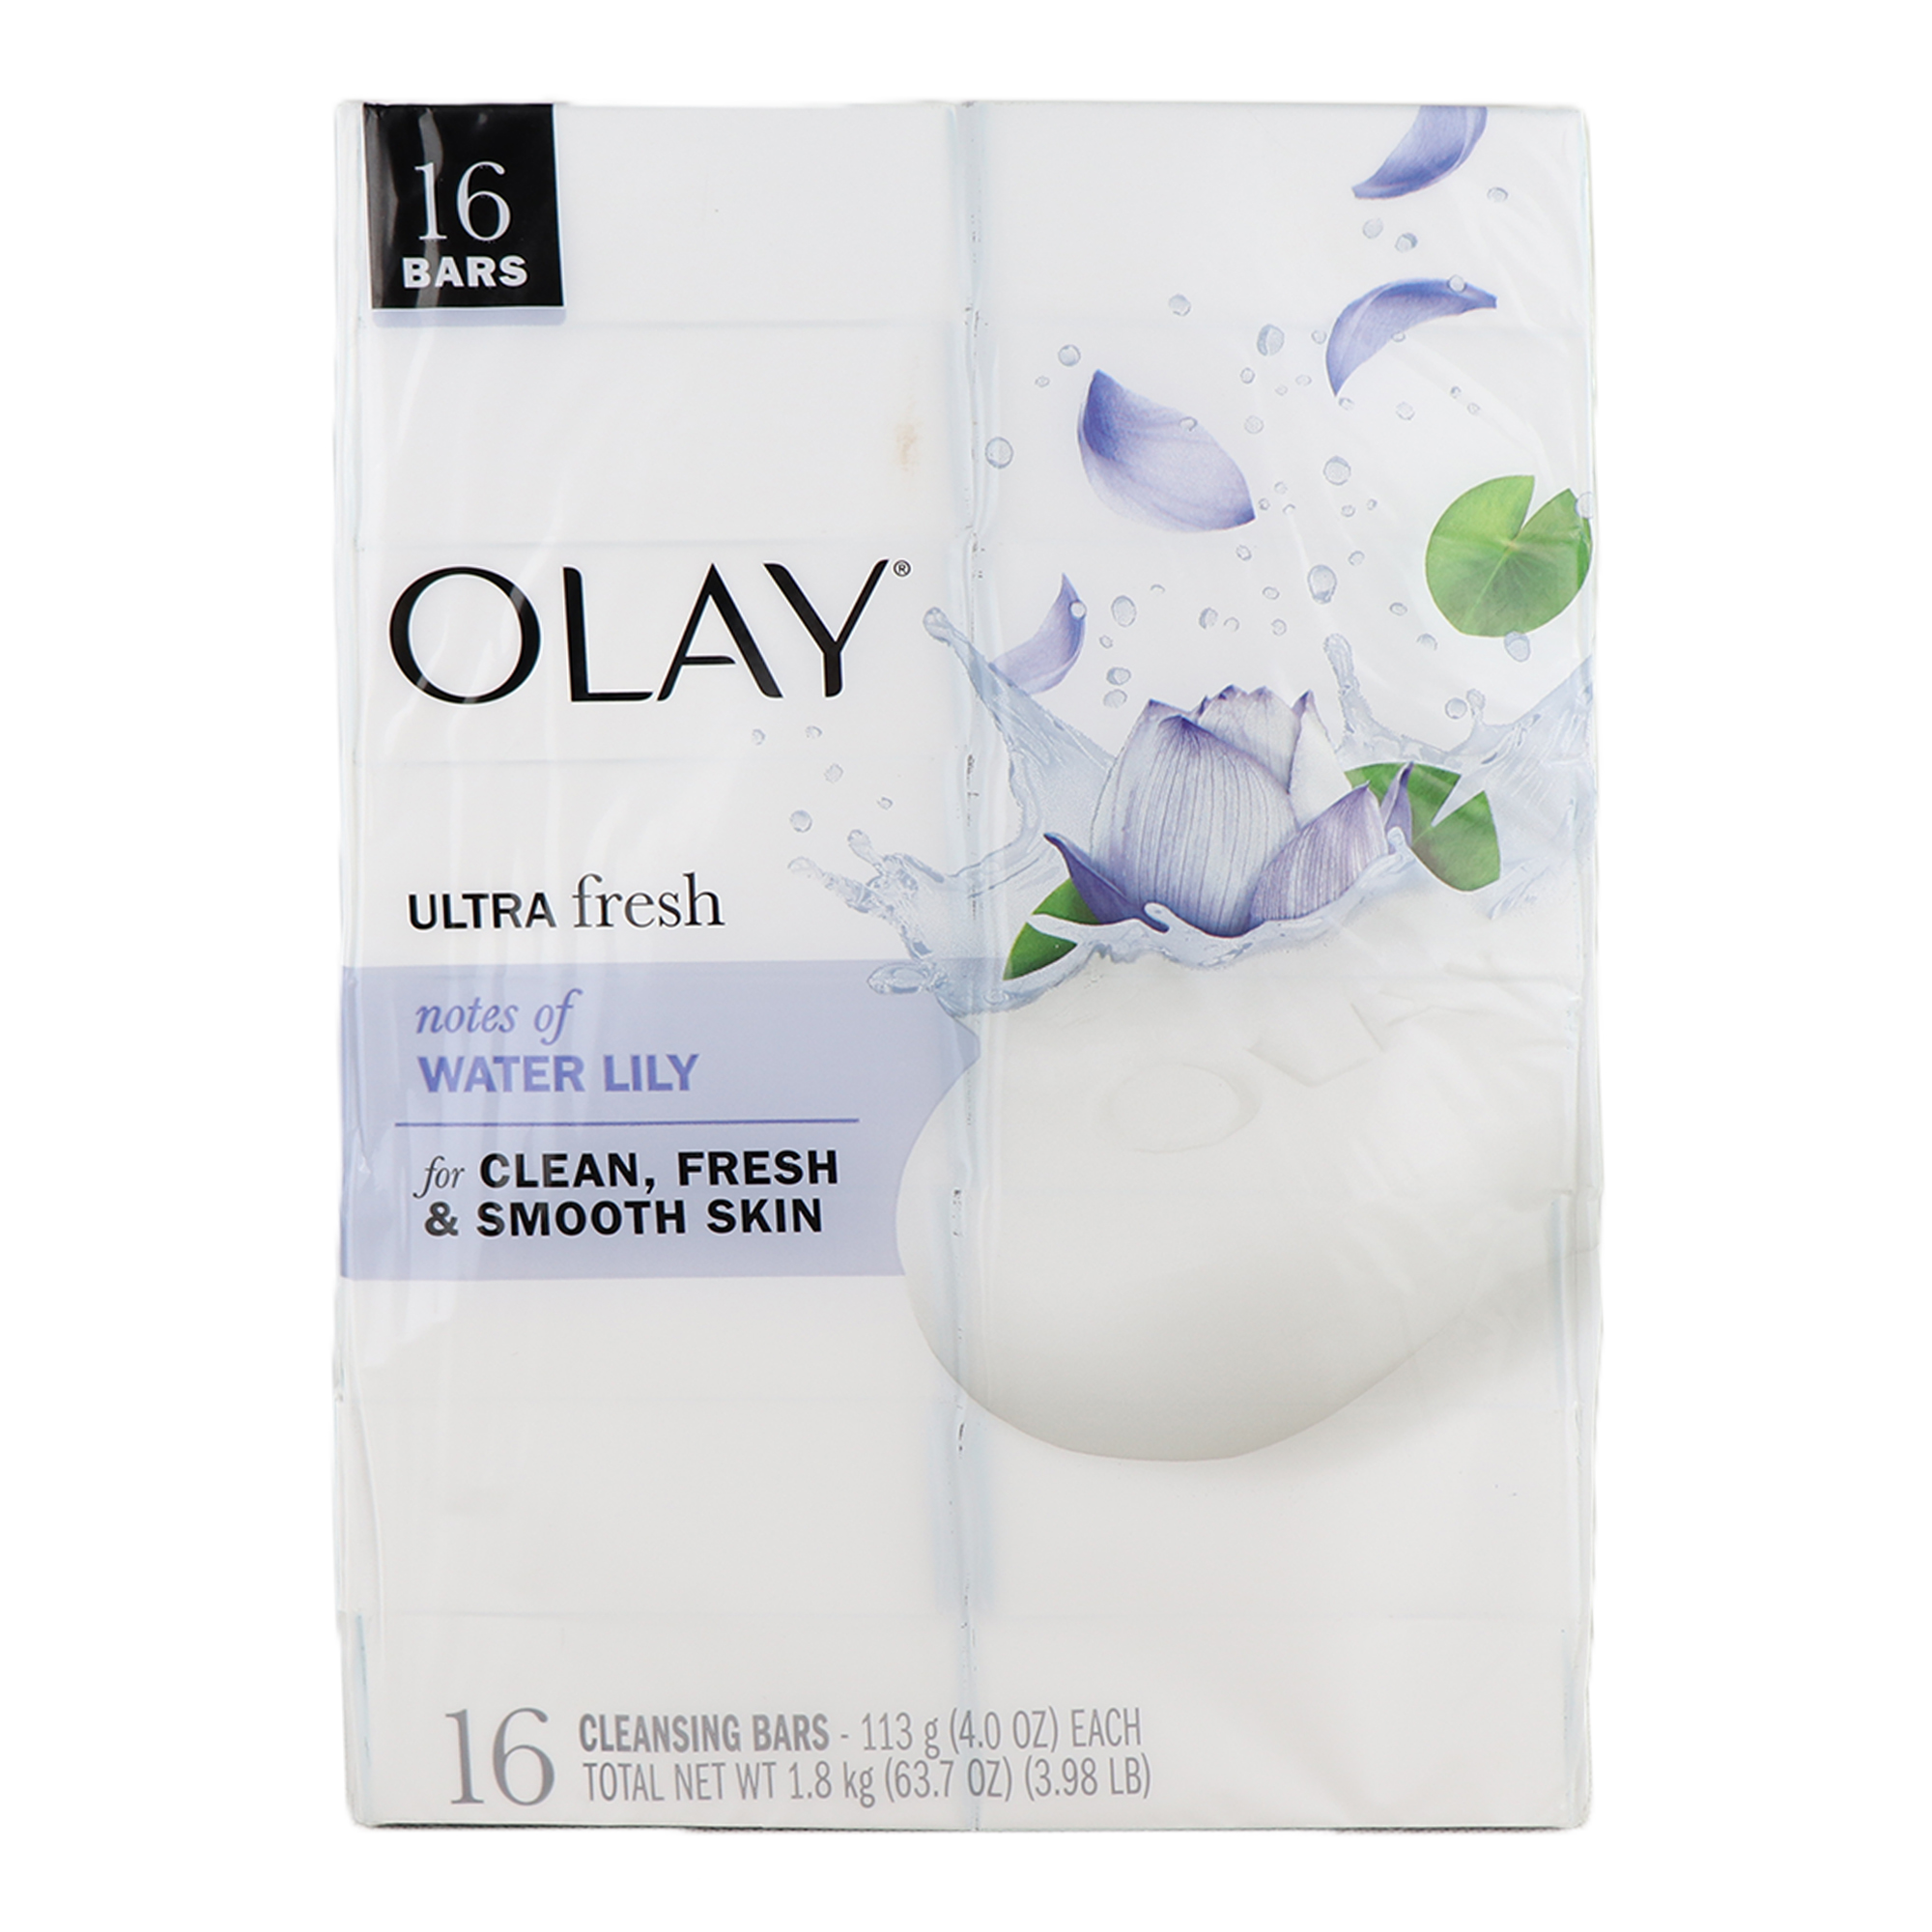 Olay Ultra Fresh Waterlily Cleansing Bar Soap 16pcs